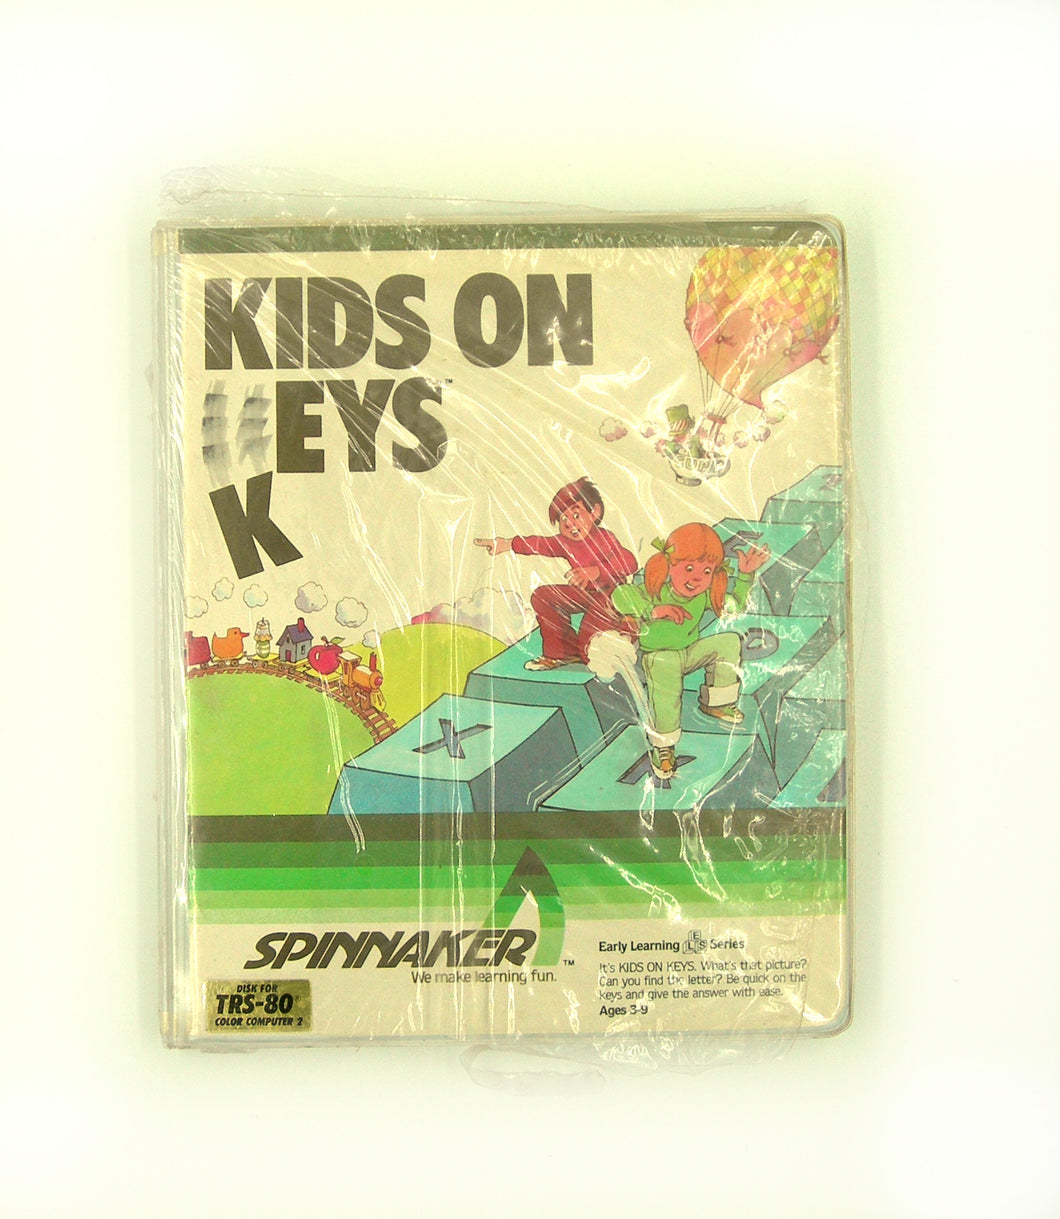 Tandy Color Computer 2 disk- Kids on Keys by Spinnaker (new,open)